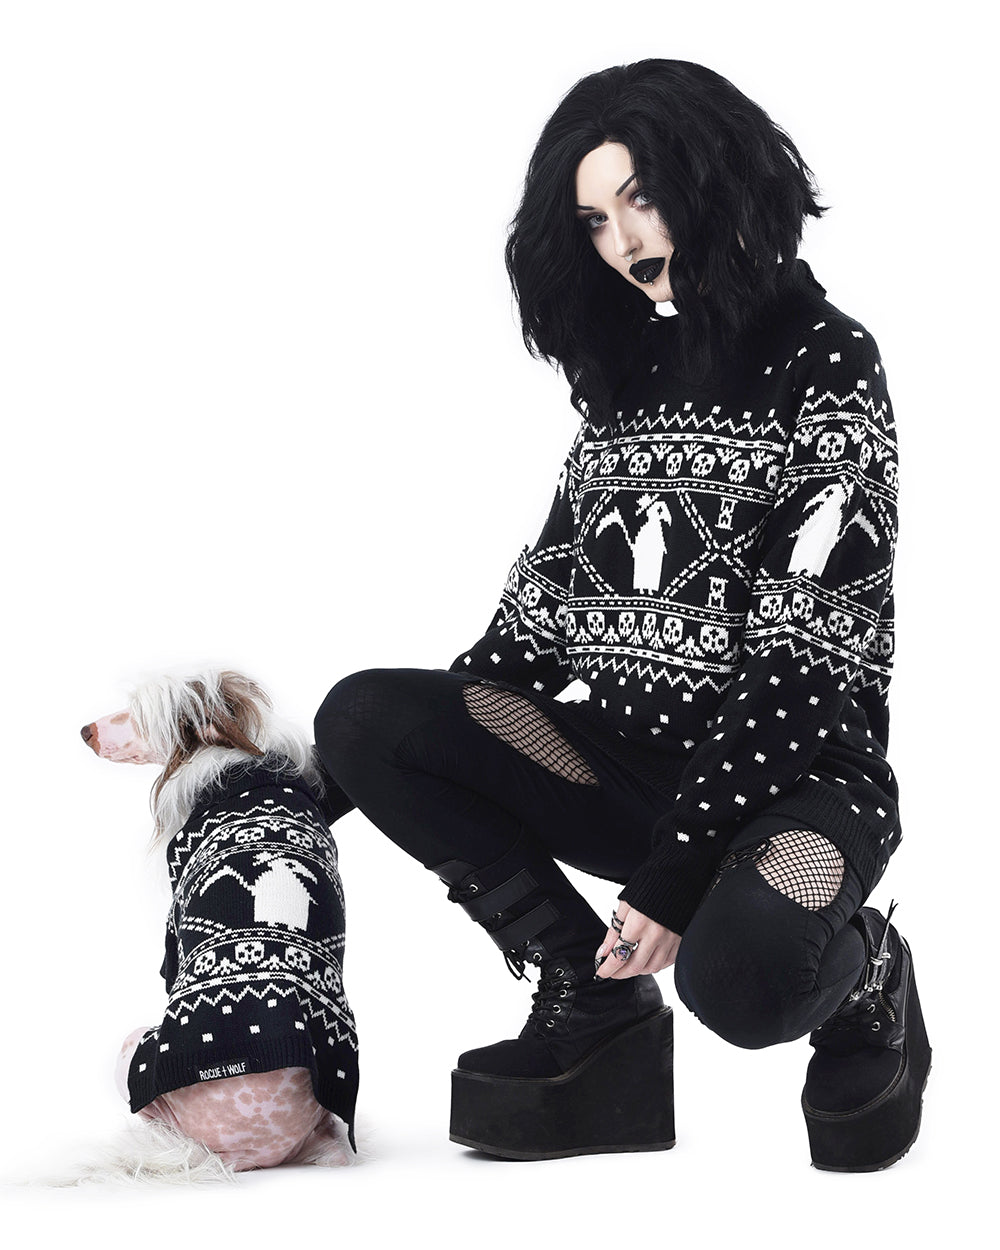 Plague Doctor Knitted Pet Sweater - Dog or Cat